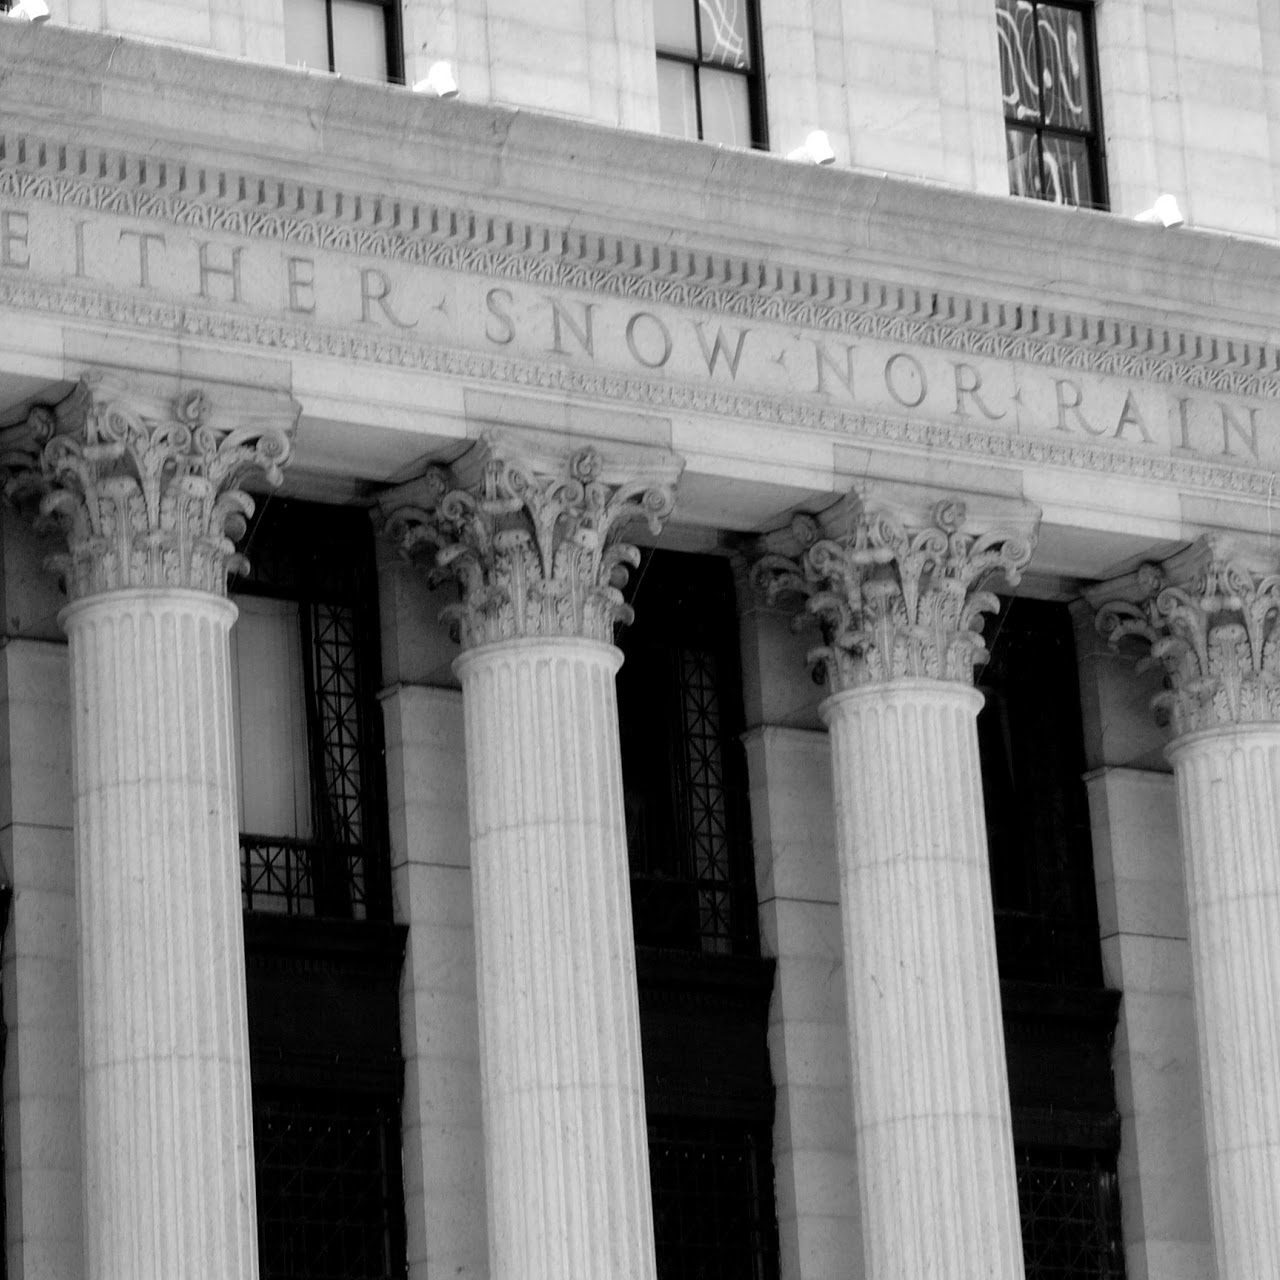 Black and white image of columns on a building.